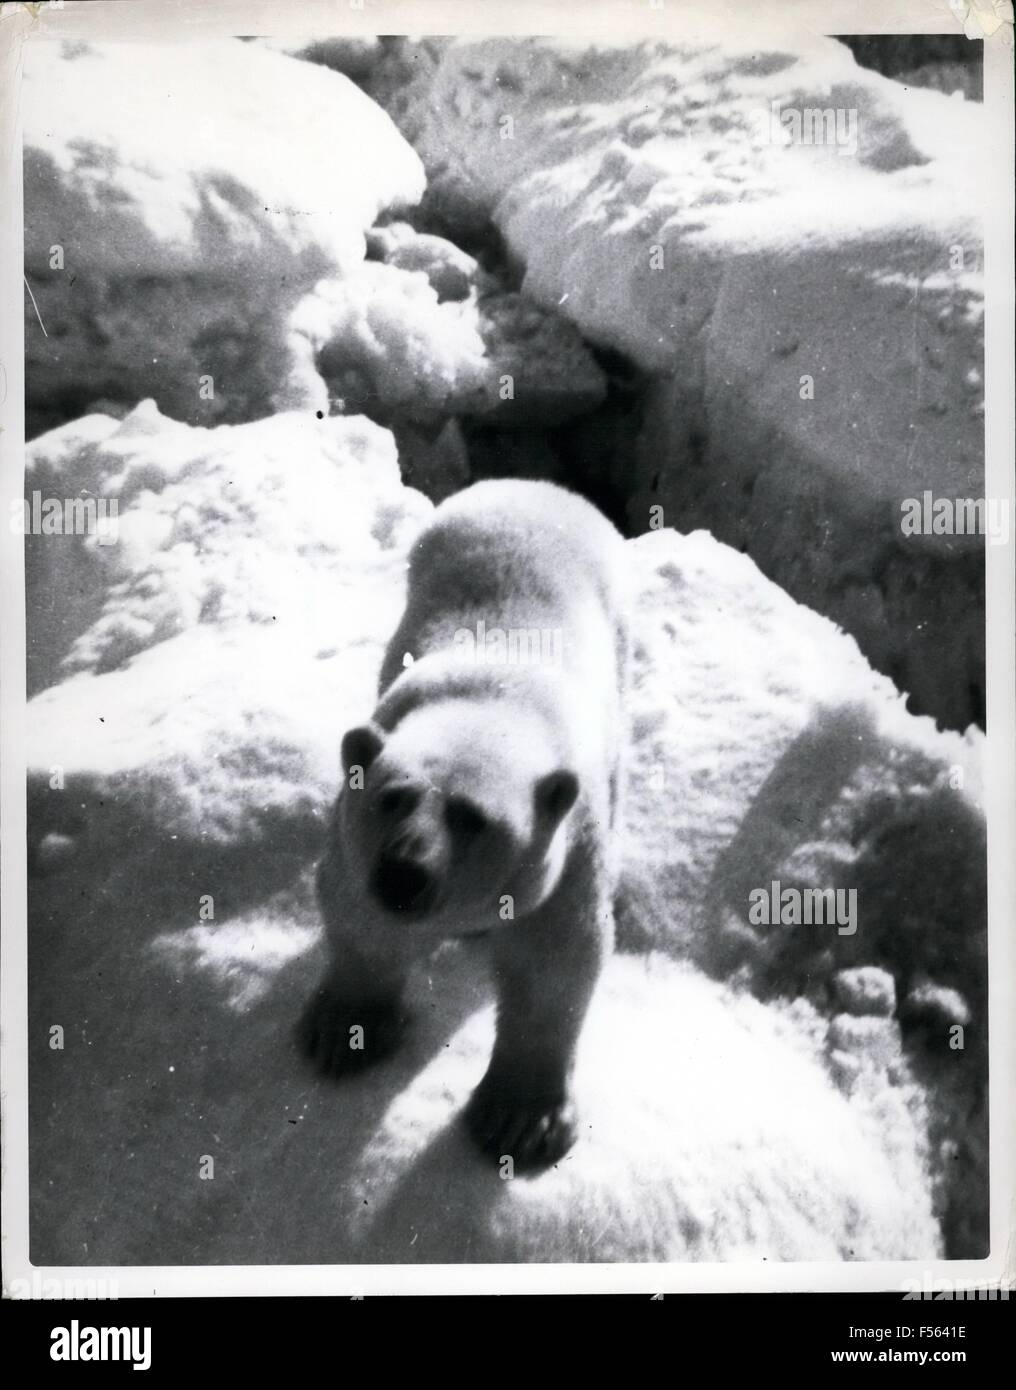 1955 - January 1955 Arctic resupply mission (Sunec) Welcome to the Arctic Mr. Bear might be saying in this portrait. The bold animal seemed to developed an affection for his visitors and even swam a mile out to sea to visit them. © Keystone Pictures USA/ZUMAPRESS.com/Alamy Live News Stock Photo